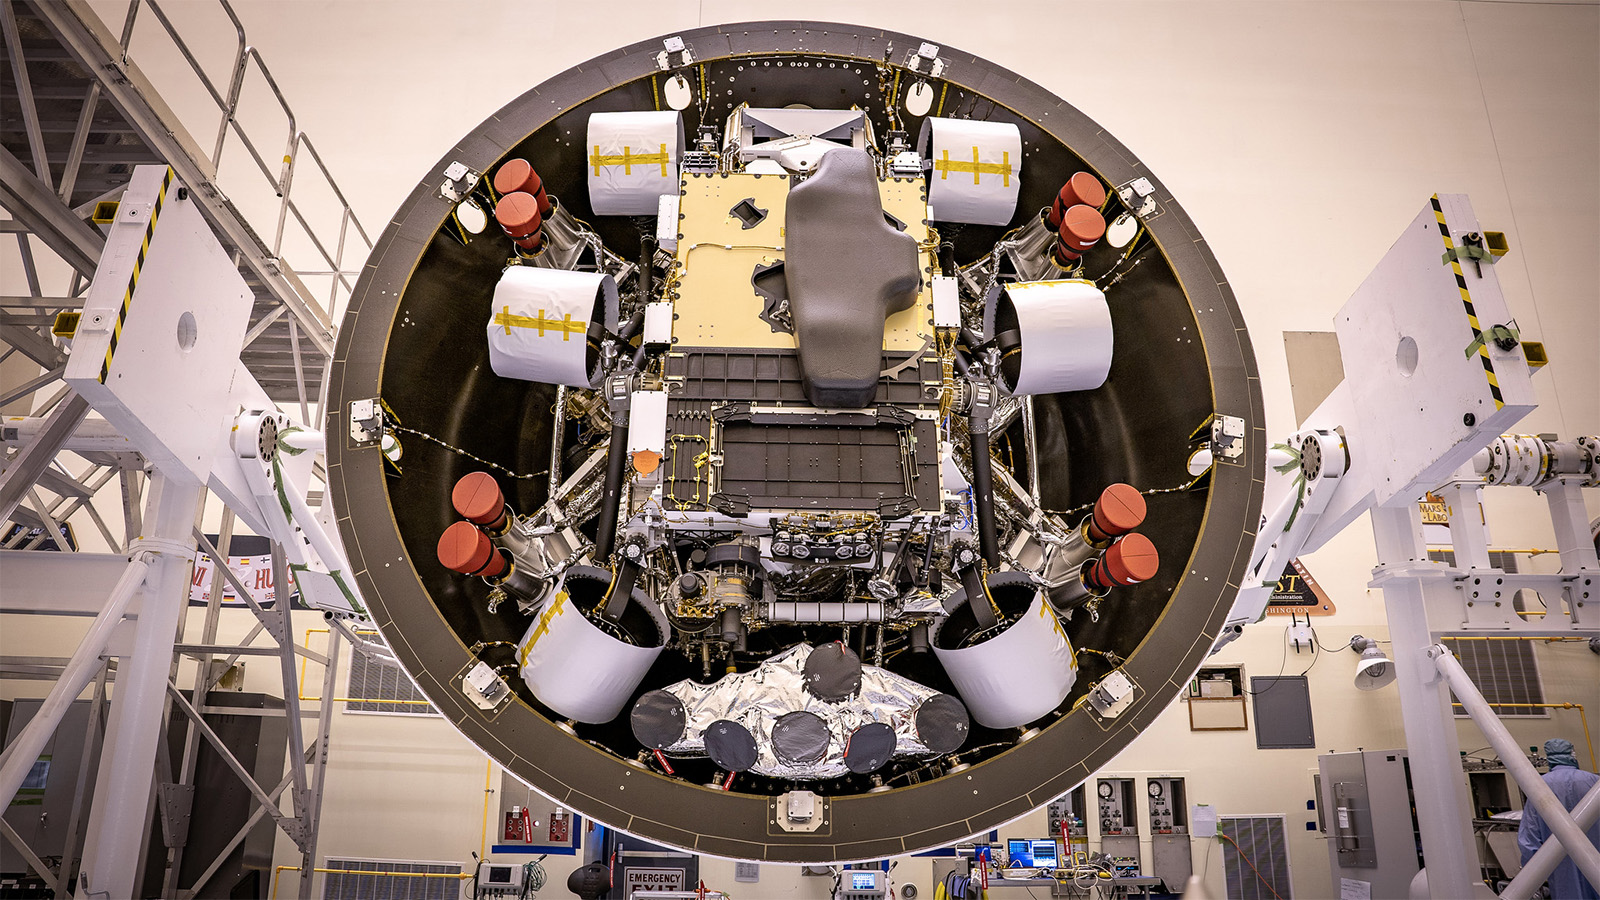 In the Payload Hazardous Servicing Facility at Kennedy Space Center in Florida, the Backshell-Powered Descent Vehicle and Entry Vehicle assemblies are being prepared to be attached to the Perseverance rover on May 4, 2020.